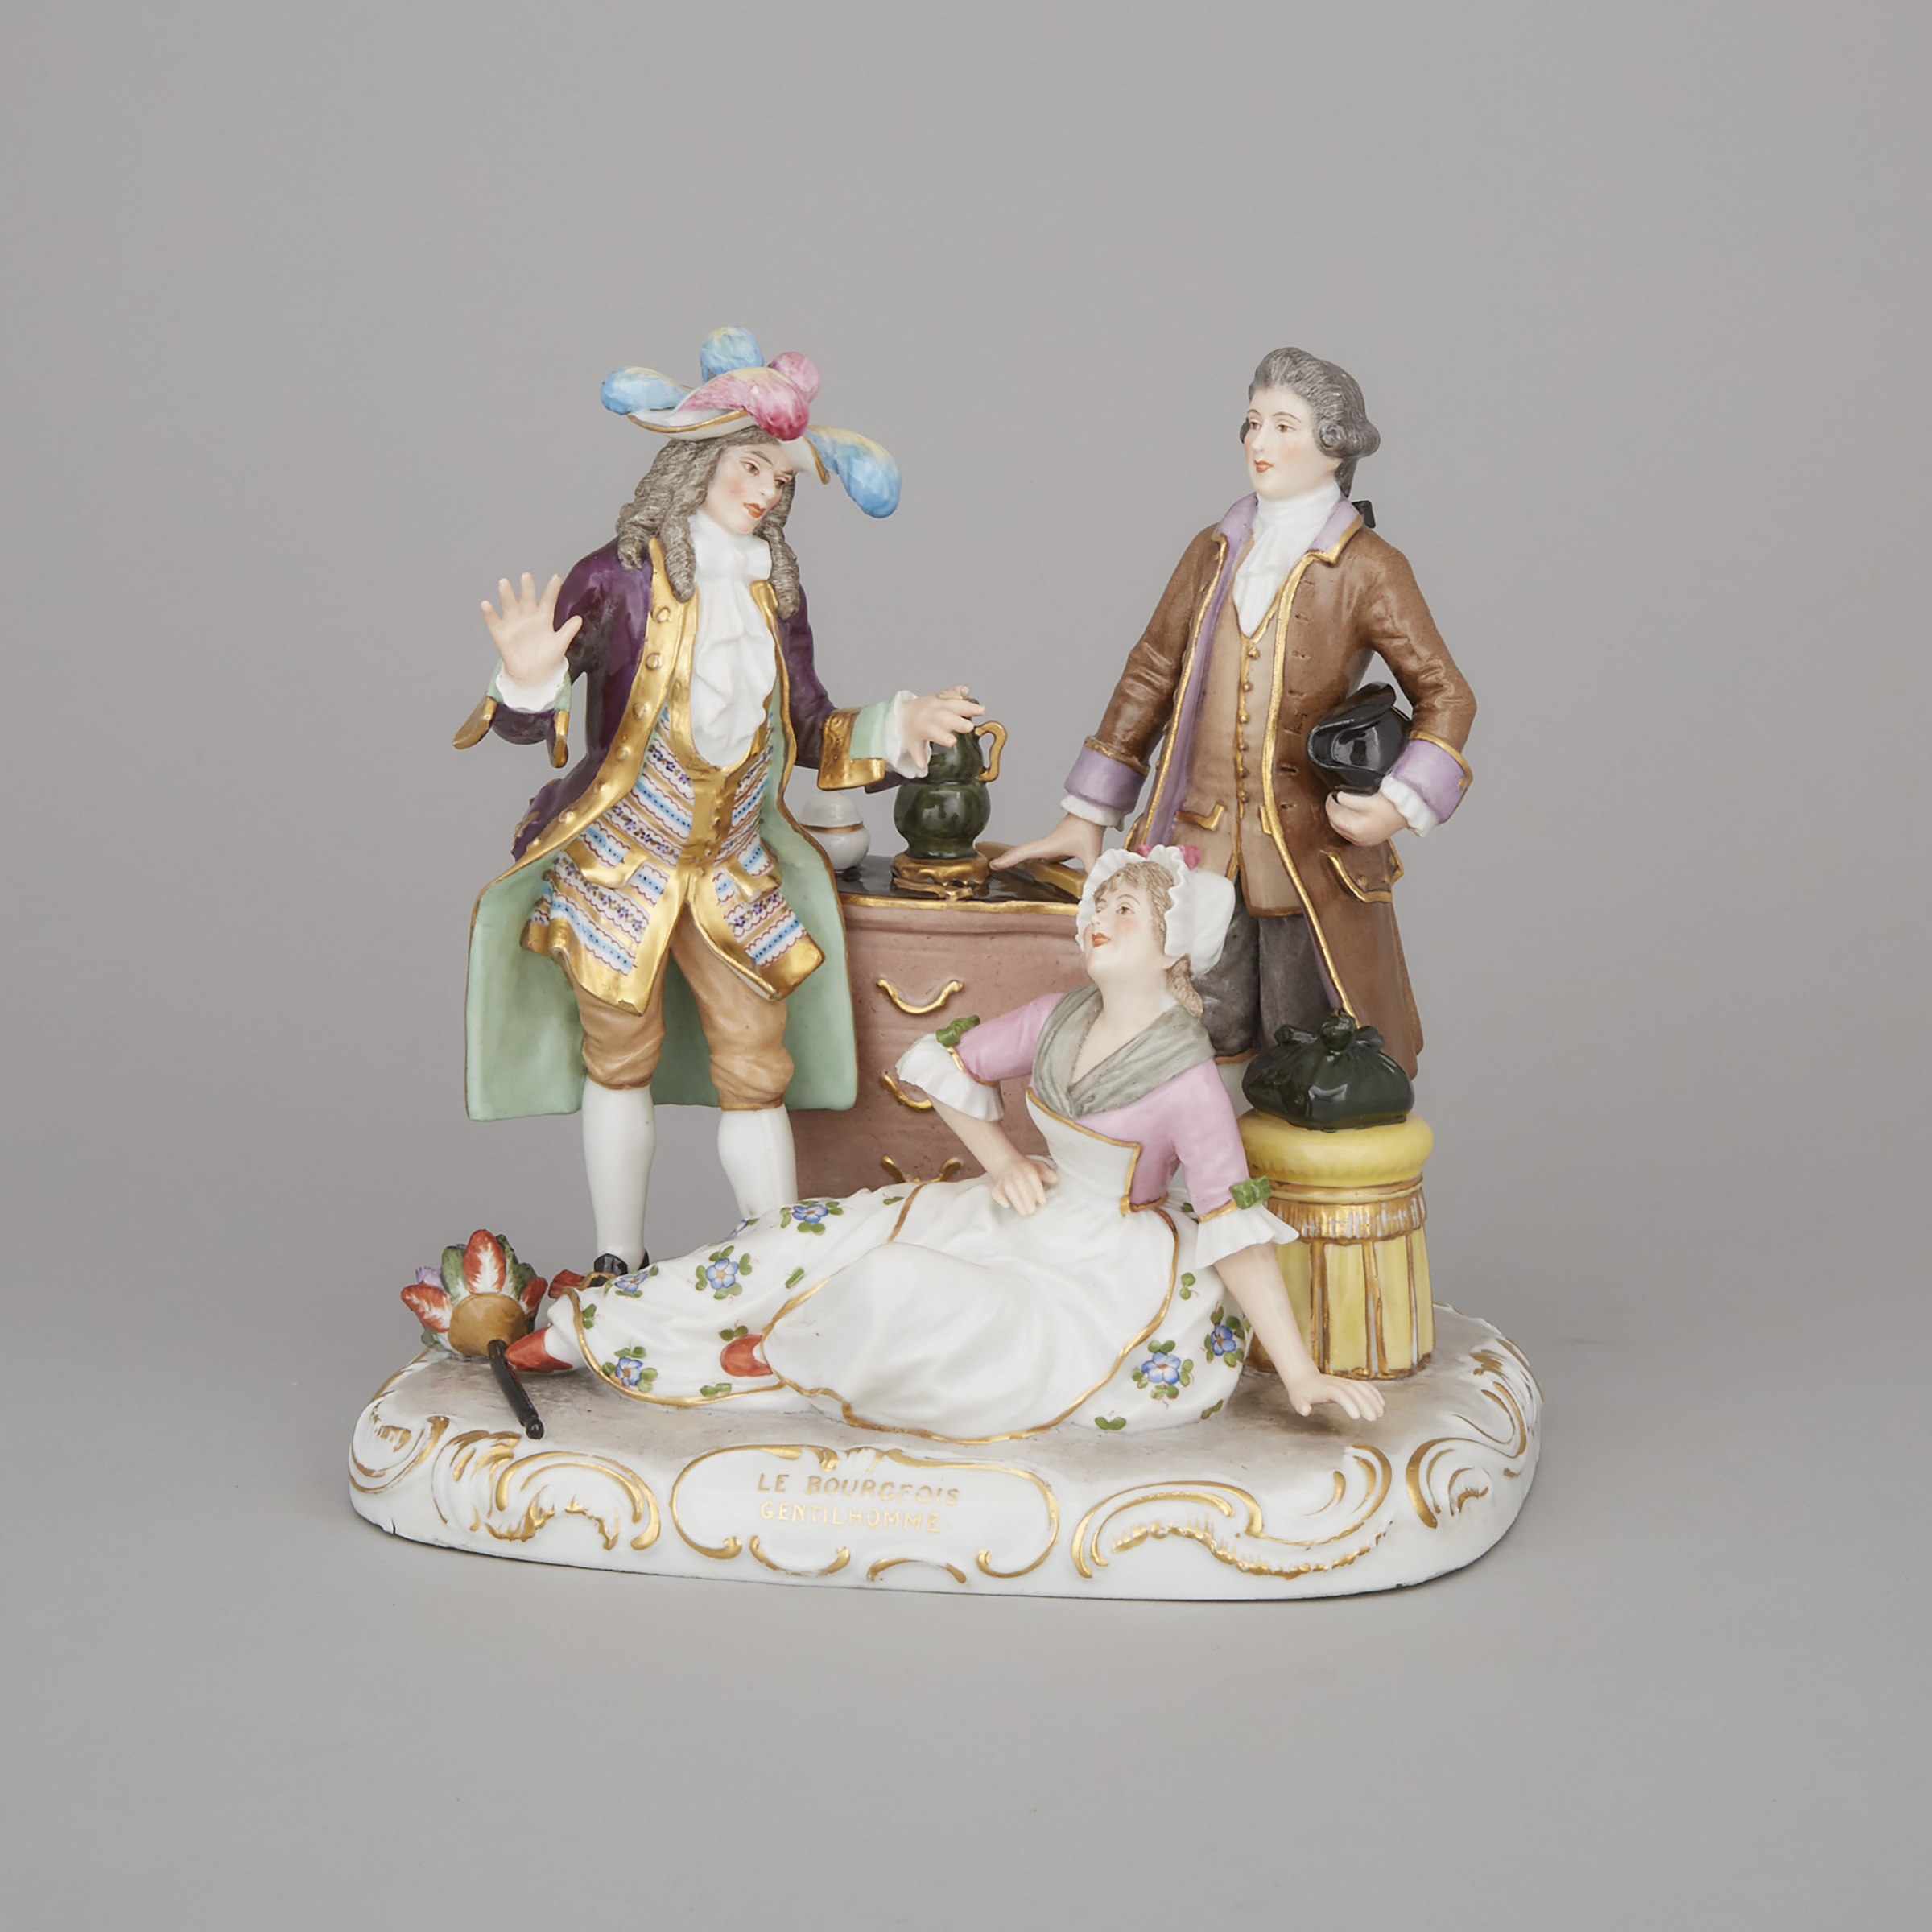 French Porcelain Figure Group, 'Le Bourgeois Gentilhomme', 20th century